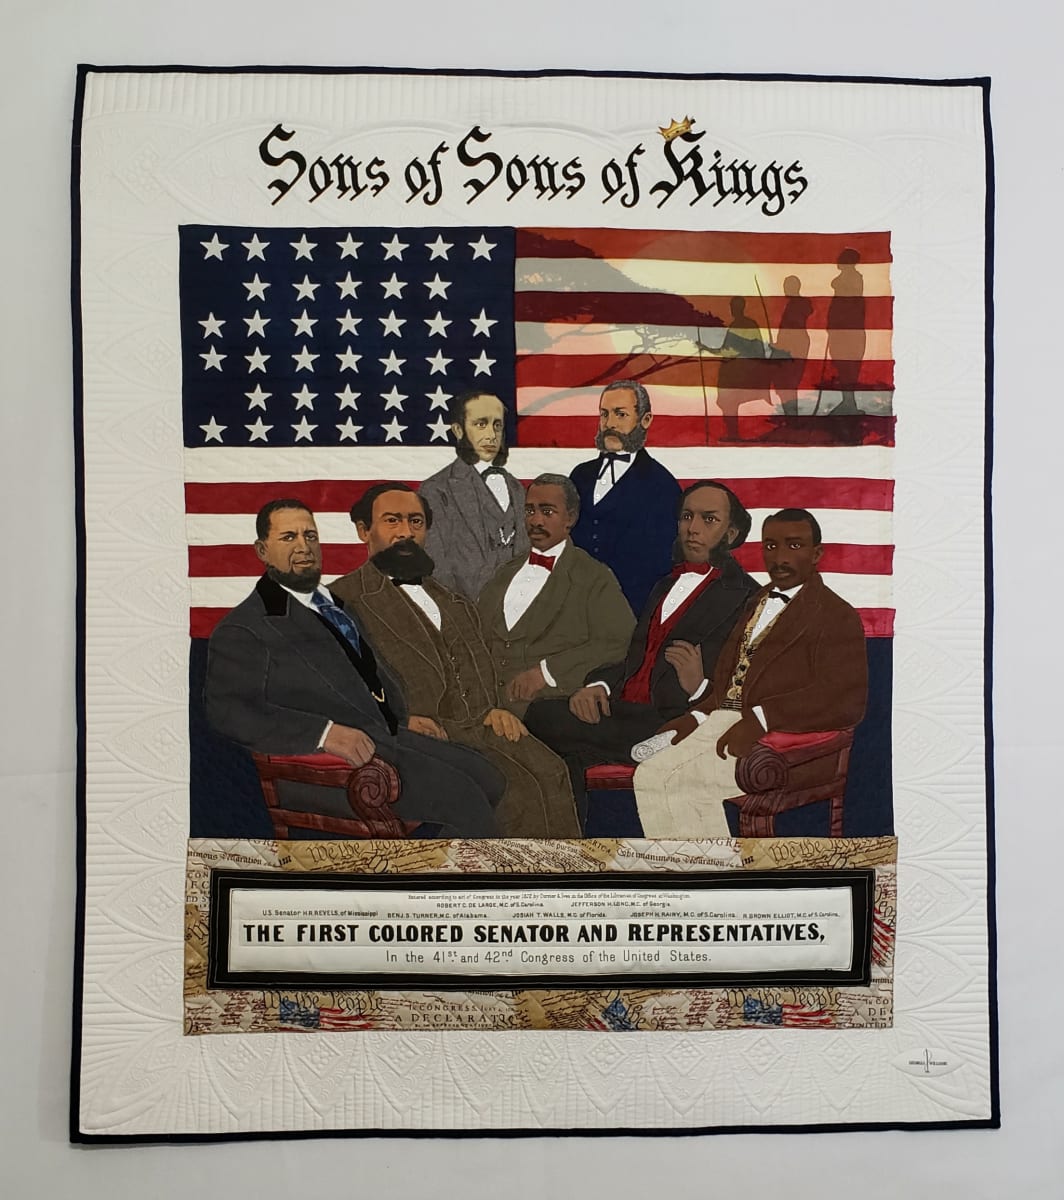 SONS OF SONS OF KINGS by Georgia Williams  Image: First Black Members of the United States Congress in the 1870s